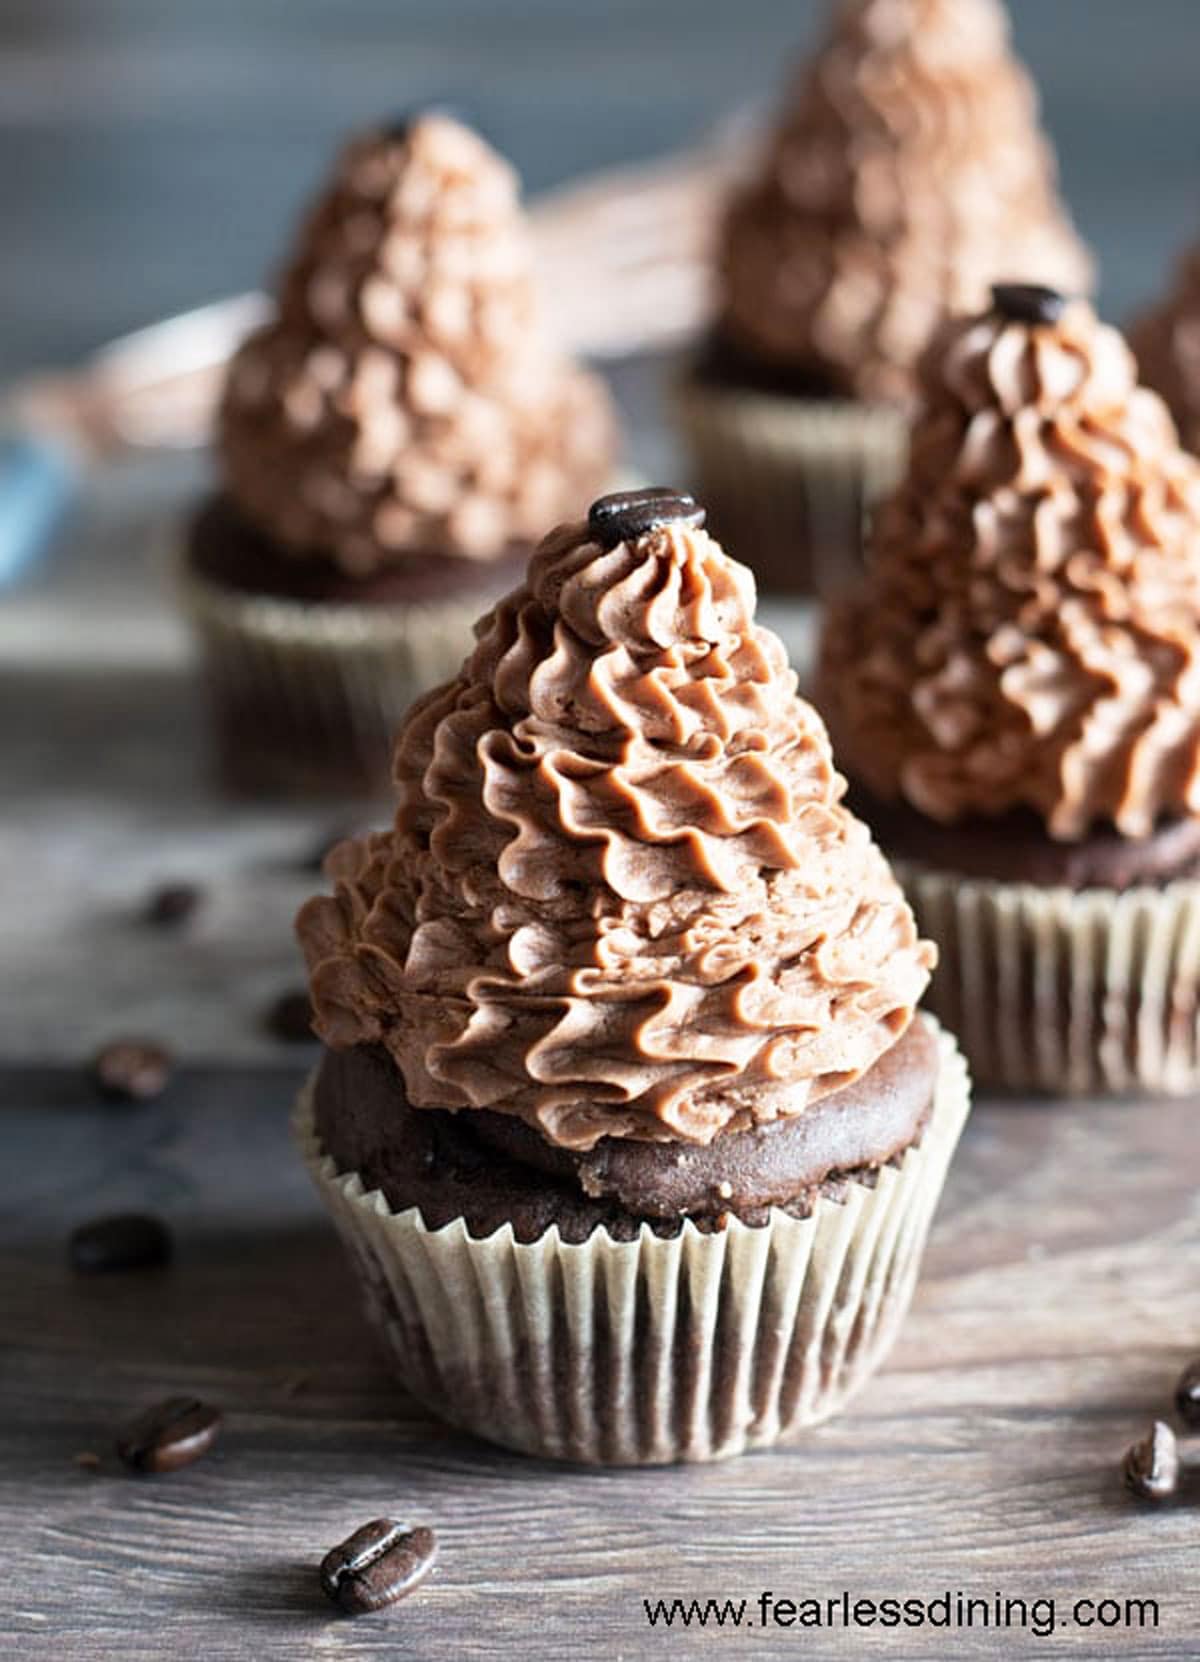 rows of frosted mocha cupcakes